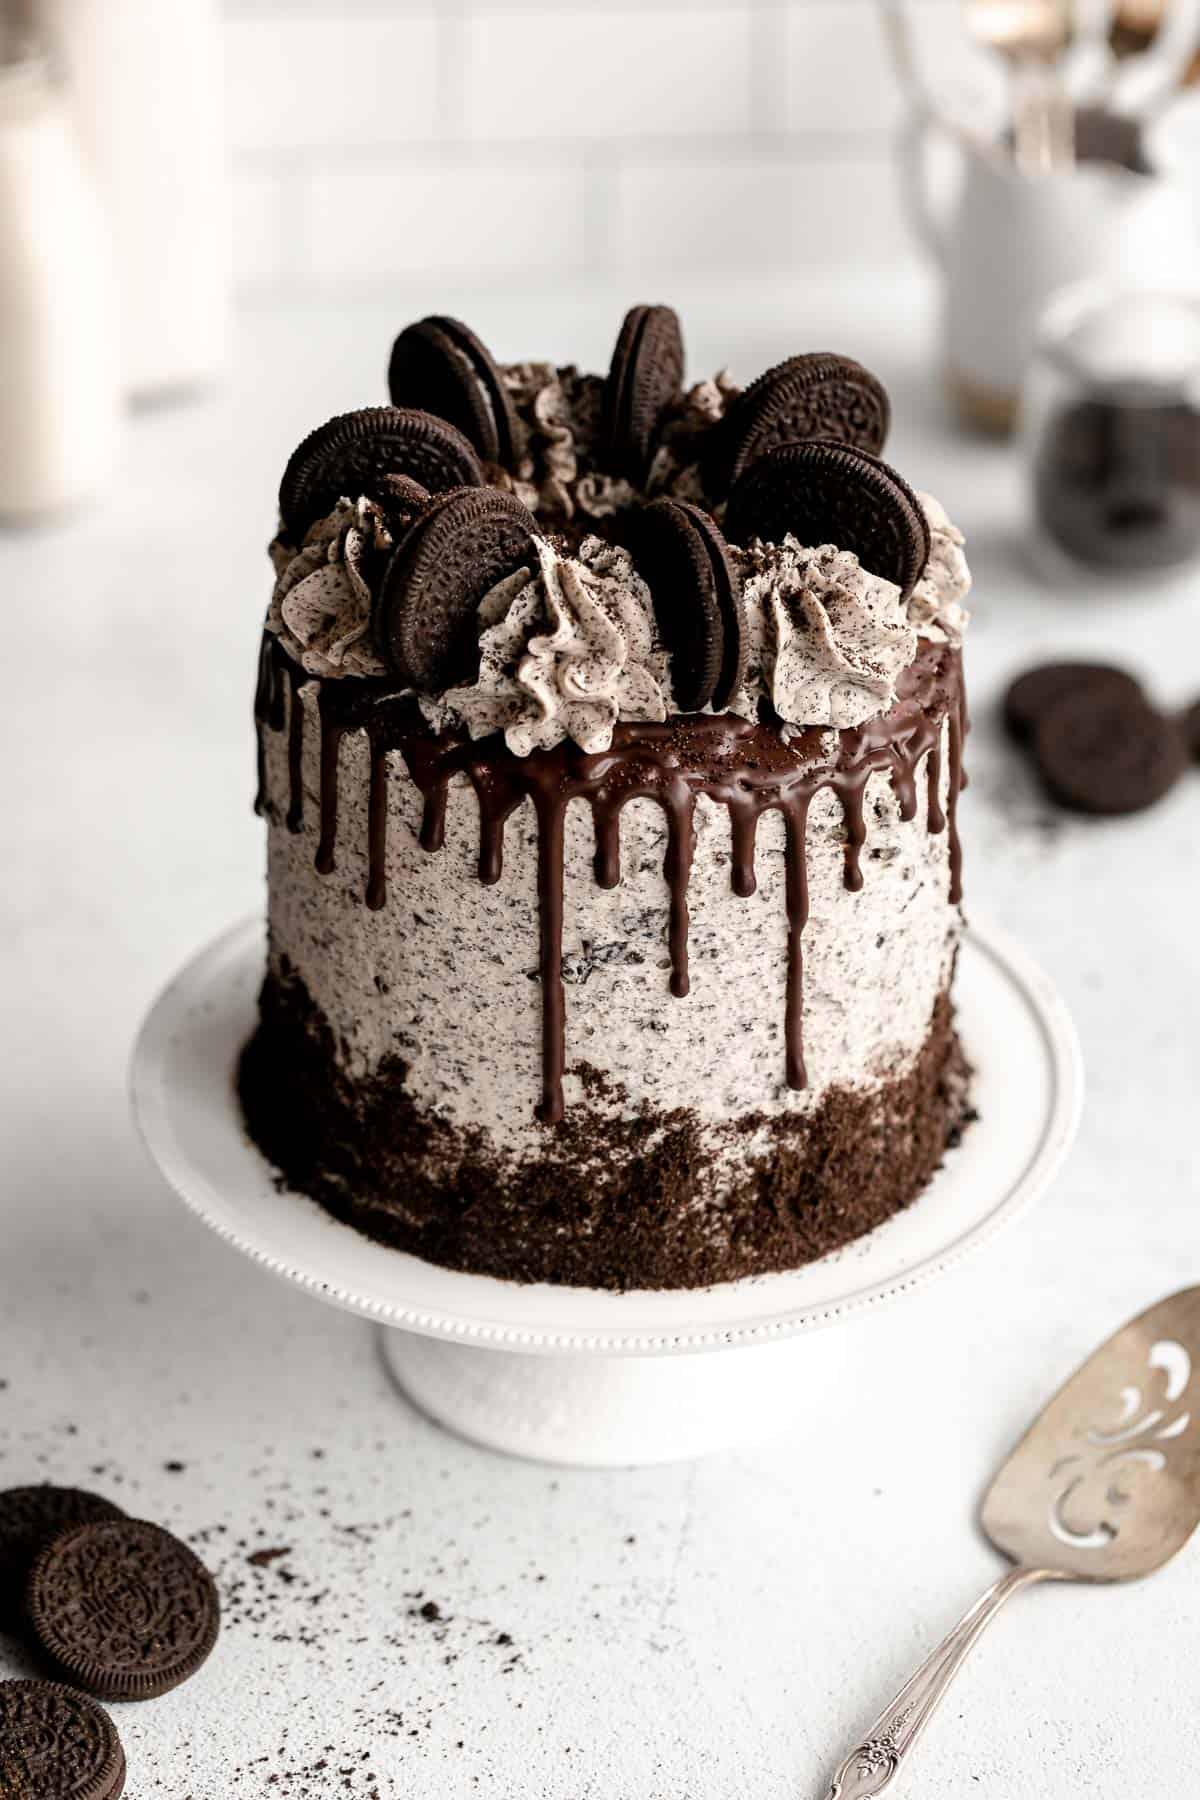 gluten free oreo cake on a cake stand with chocolate drips